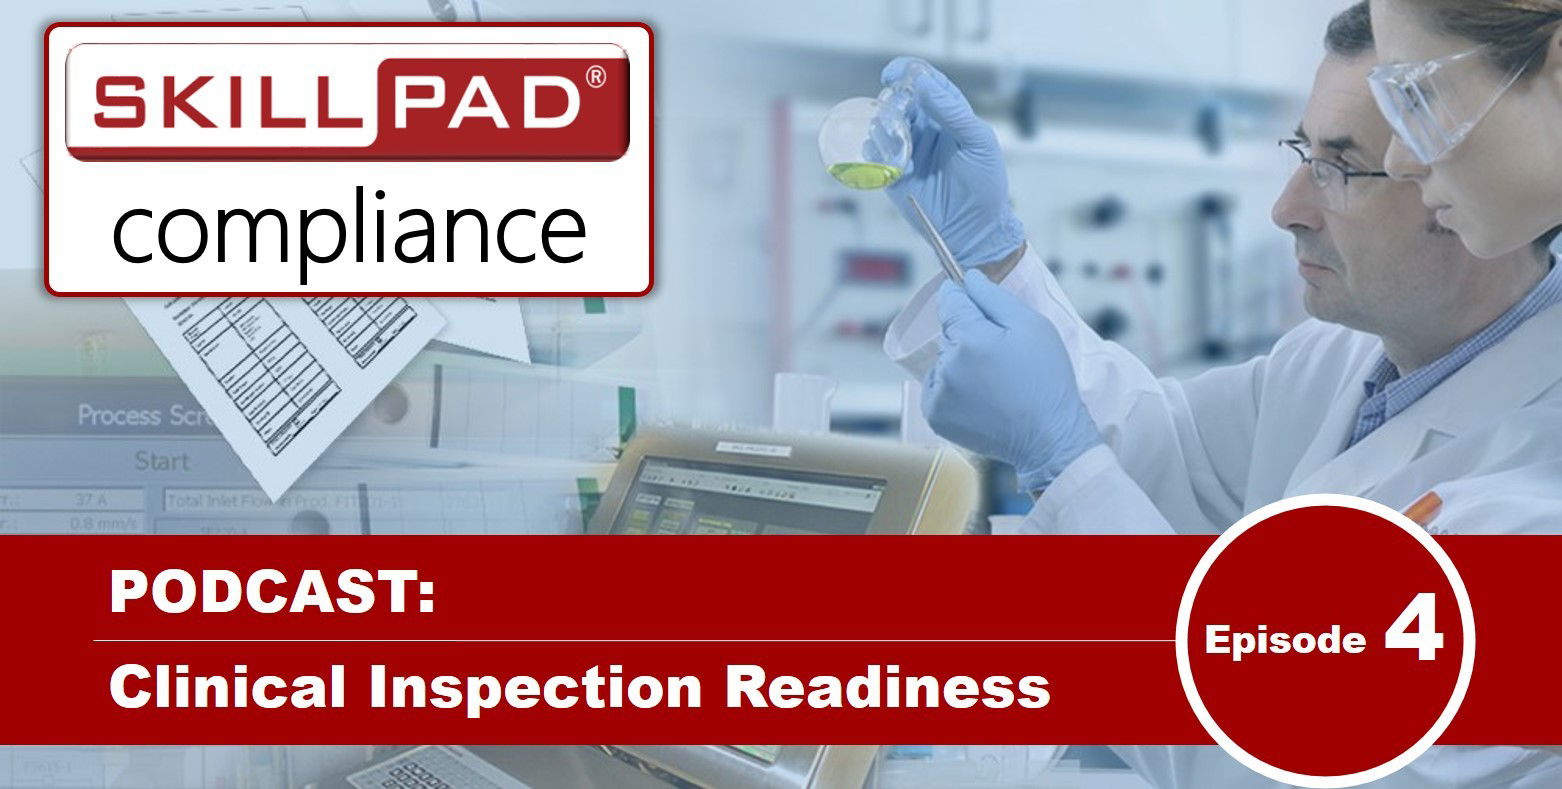 Clinical Inspection Readiness Podcast - Episode 4